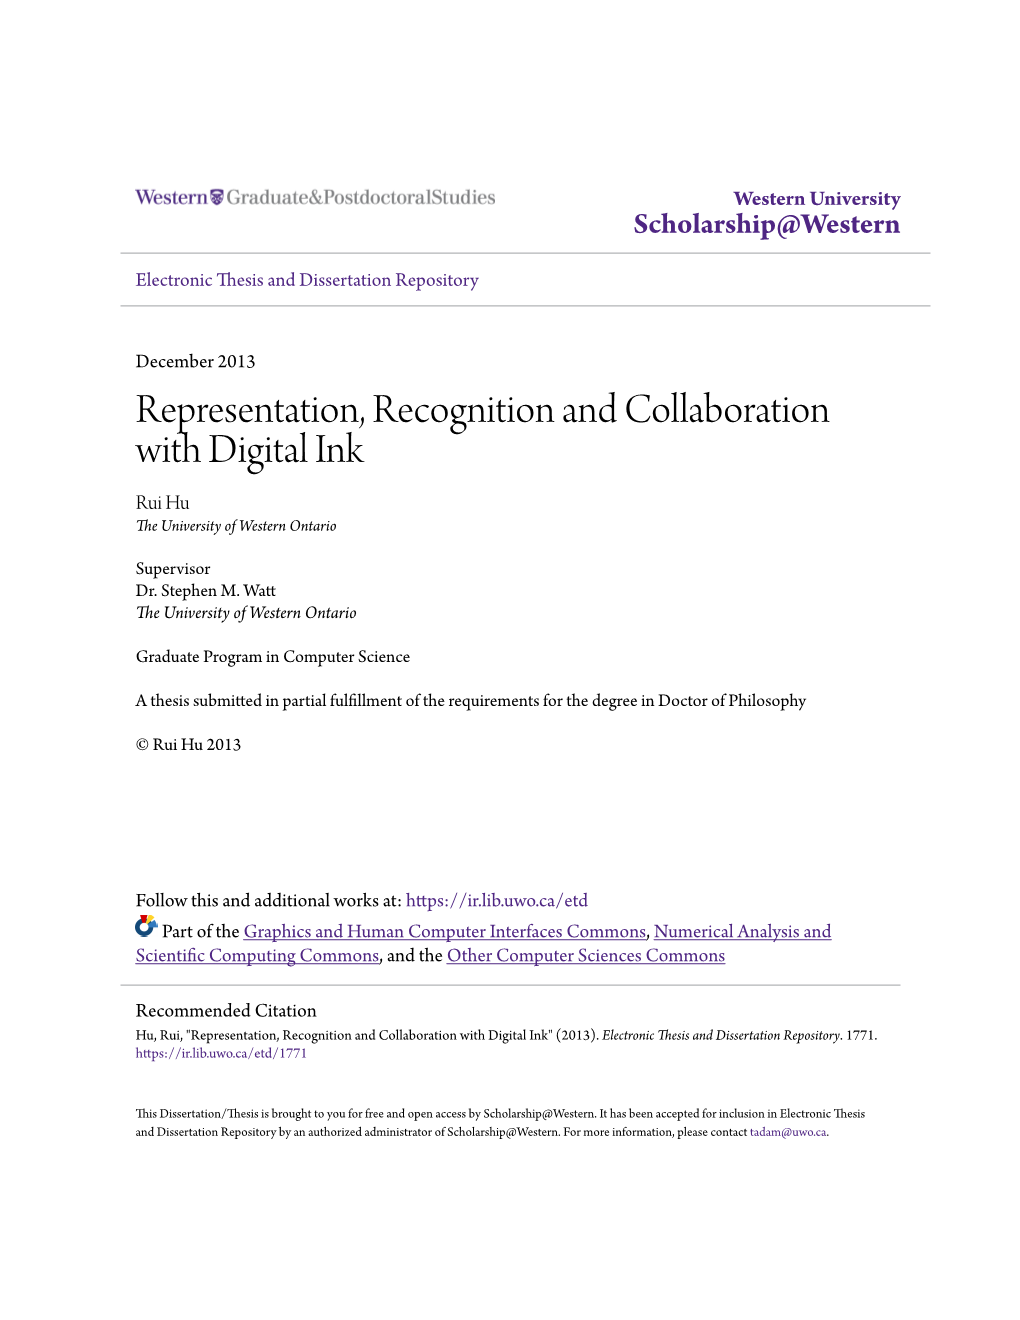 Representation, Recognition and Collaboration with Digital Ink Rui Hu the University of Western Ontario